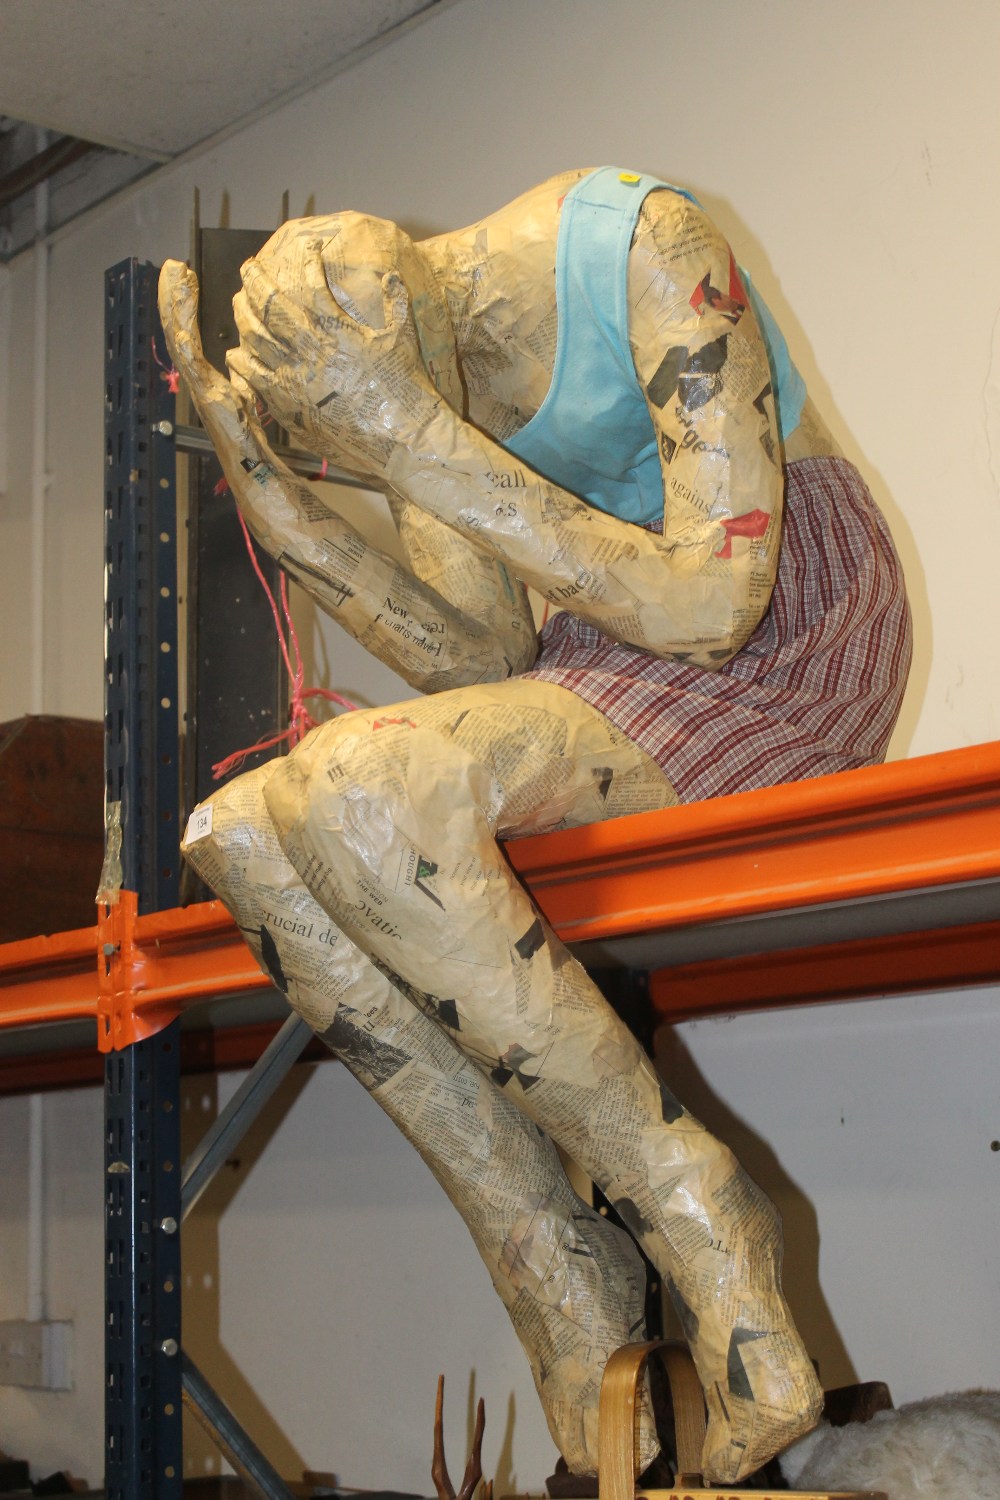 A PAPER MACHE MODEL OF A PERSON WEEPING